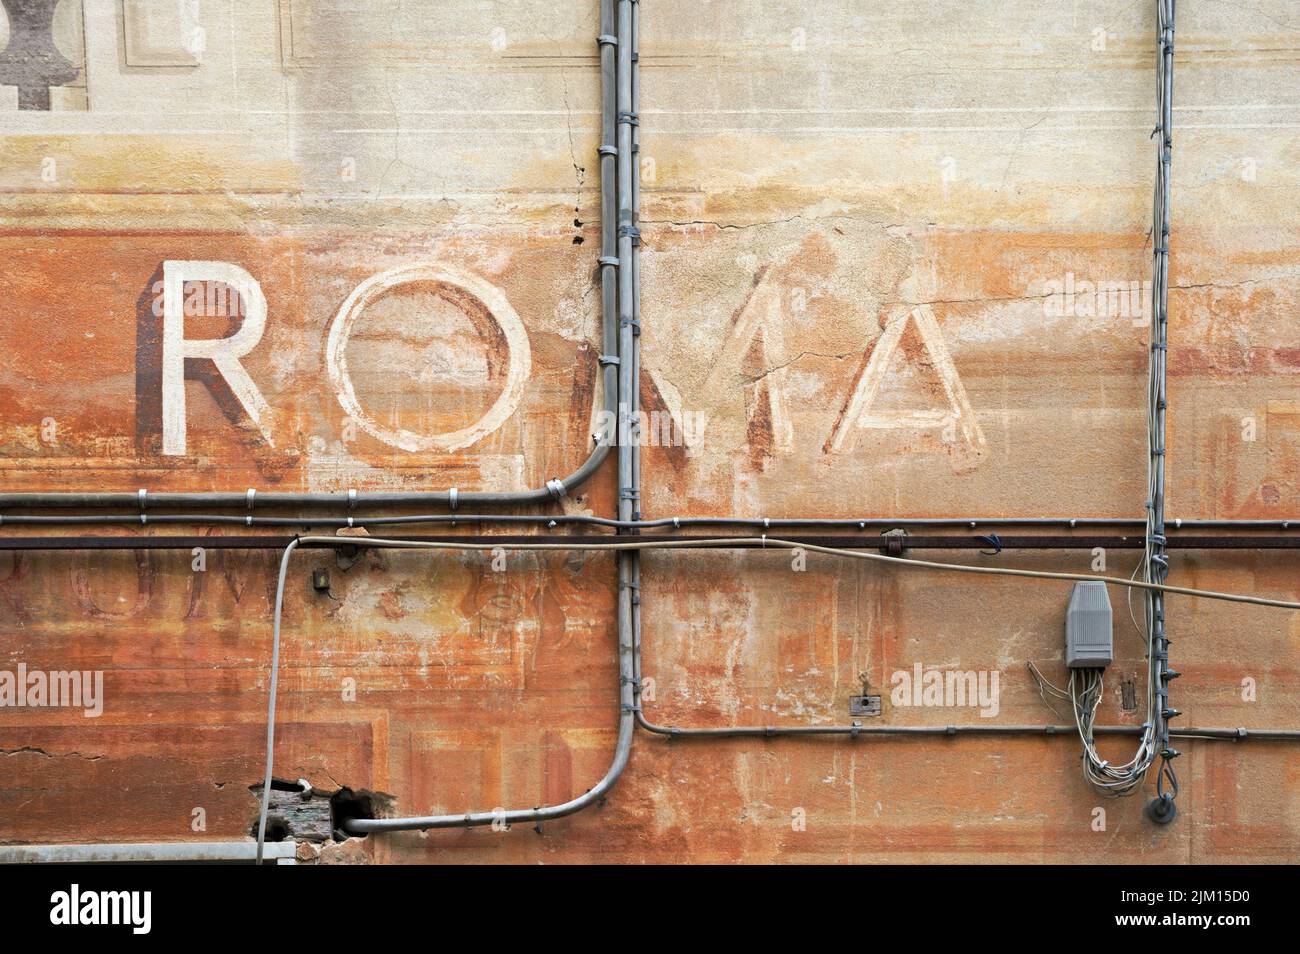 fading painted sign ROMA on wall with cables Stock Photo